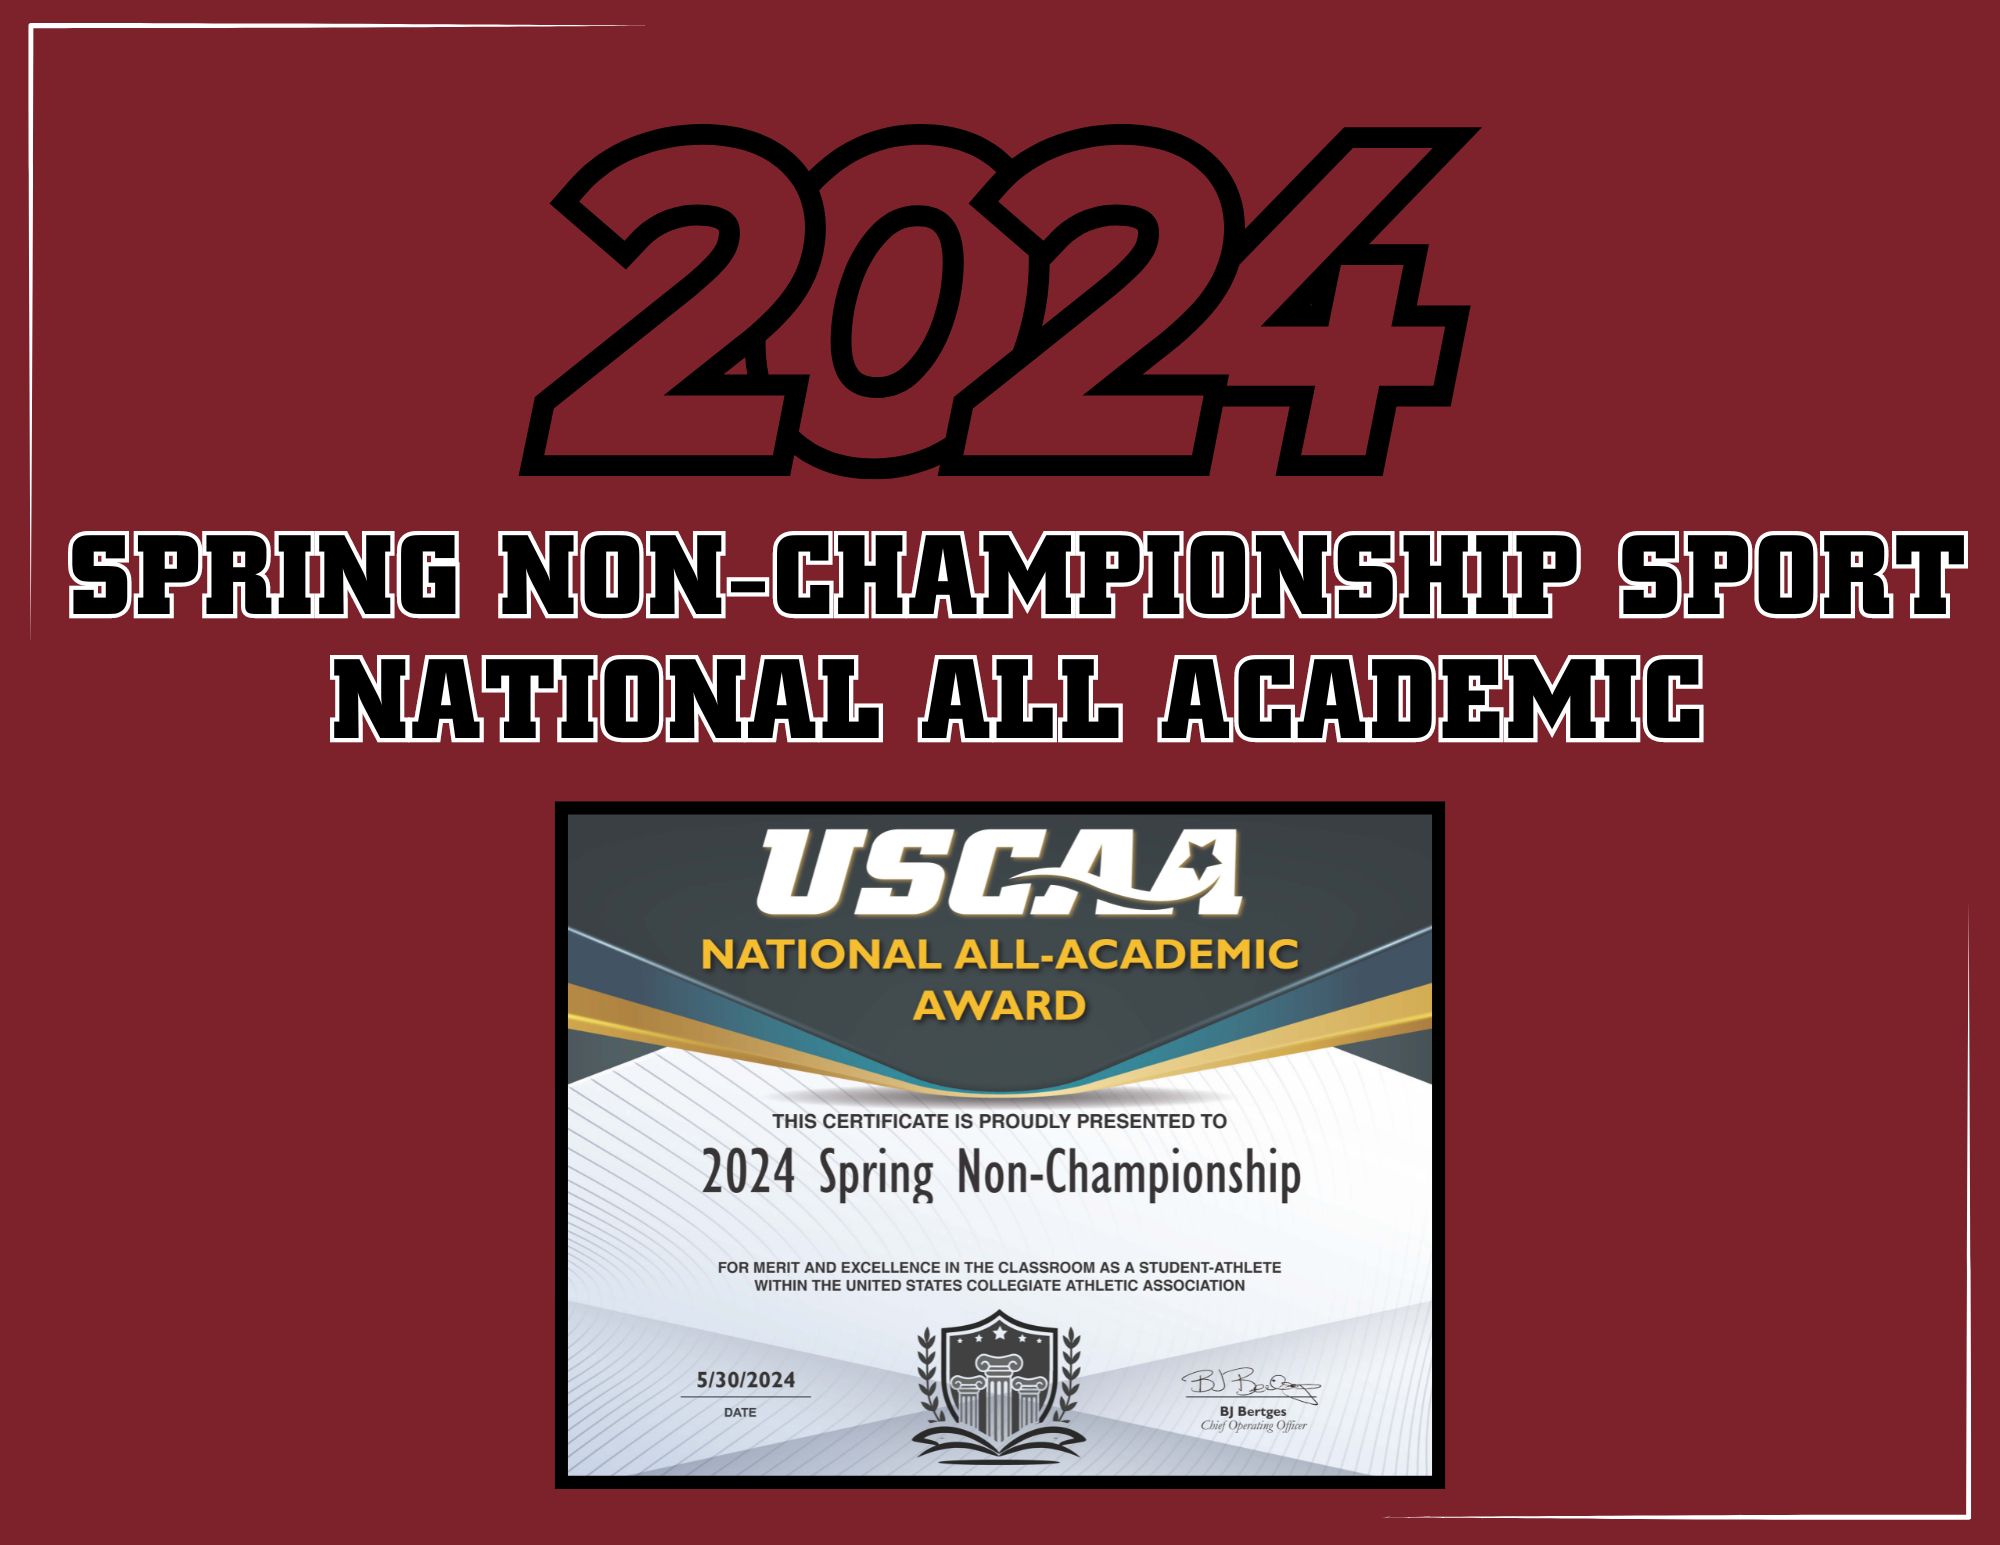 USCAA Announces the 2024 Spring Non-Championship Sport National All-Academic Award Winners